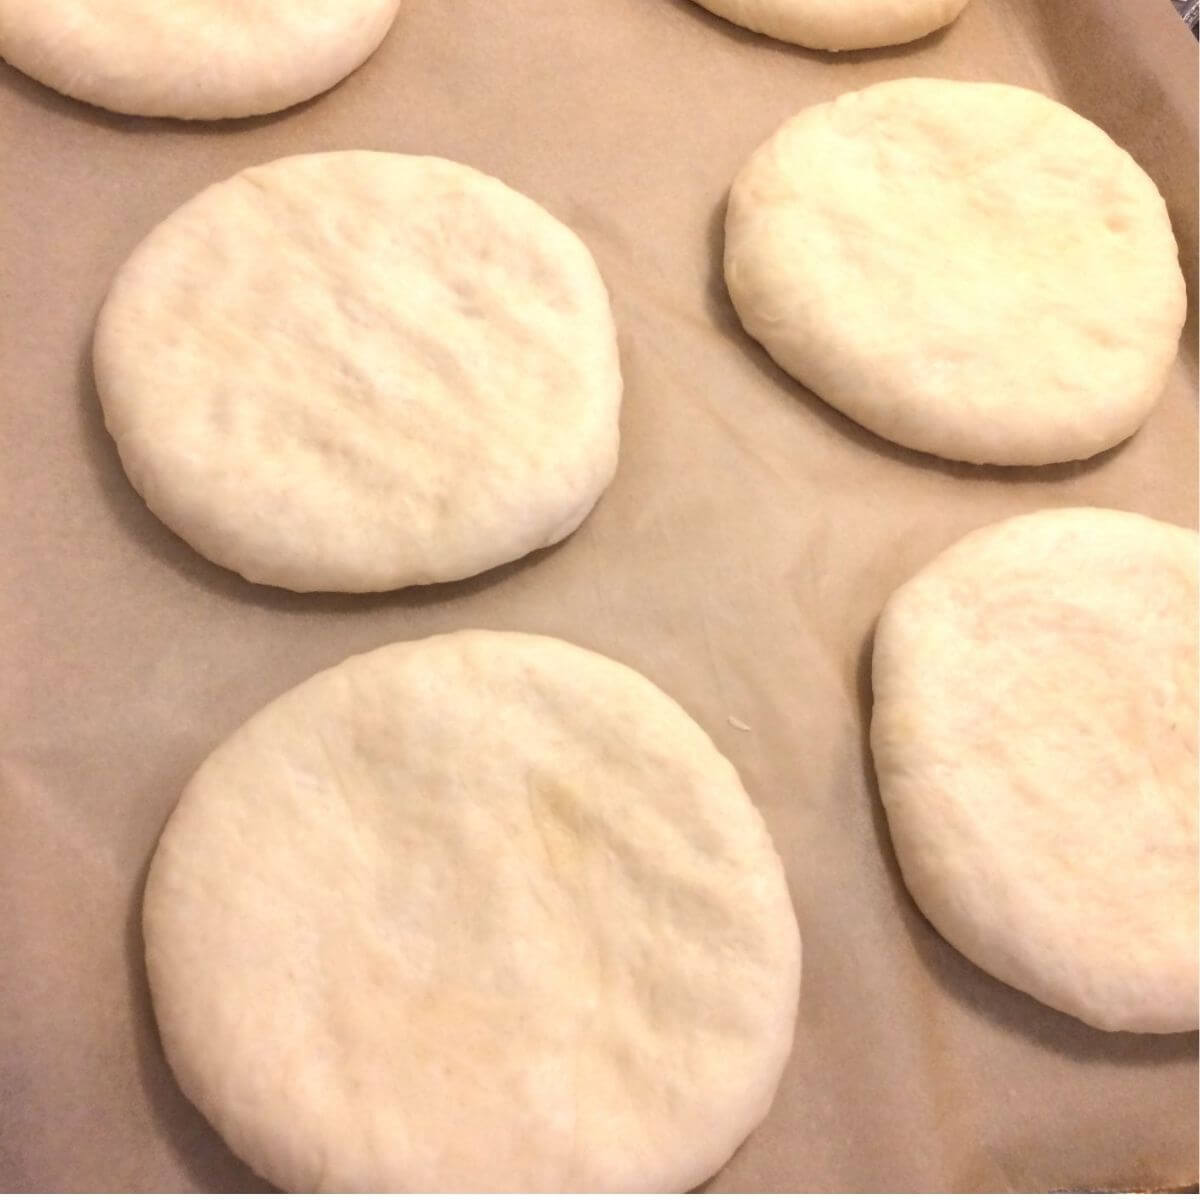 potato bread rounds pressed out flat on parchment paper, uncooked.